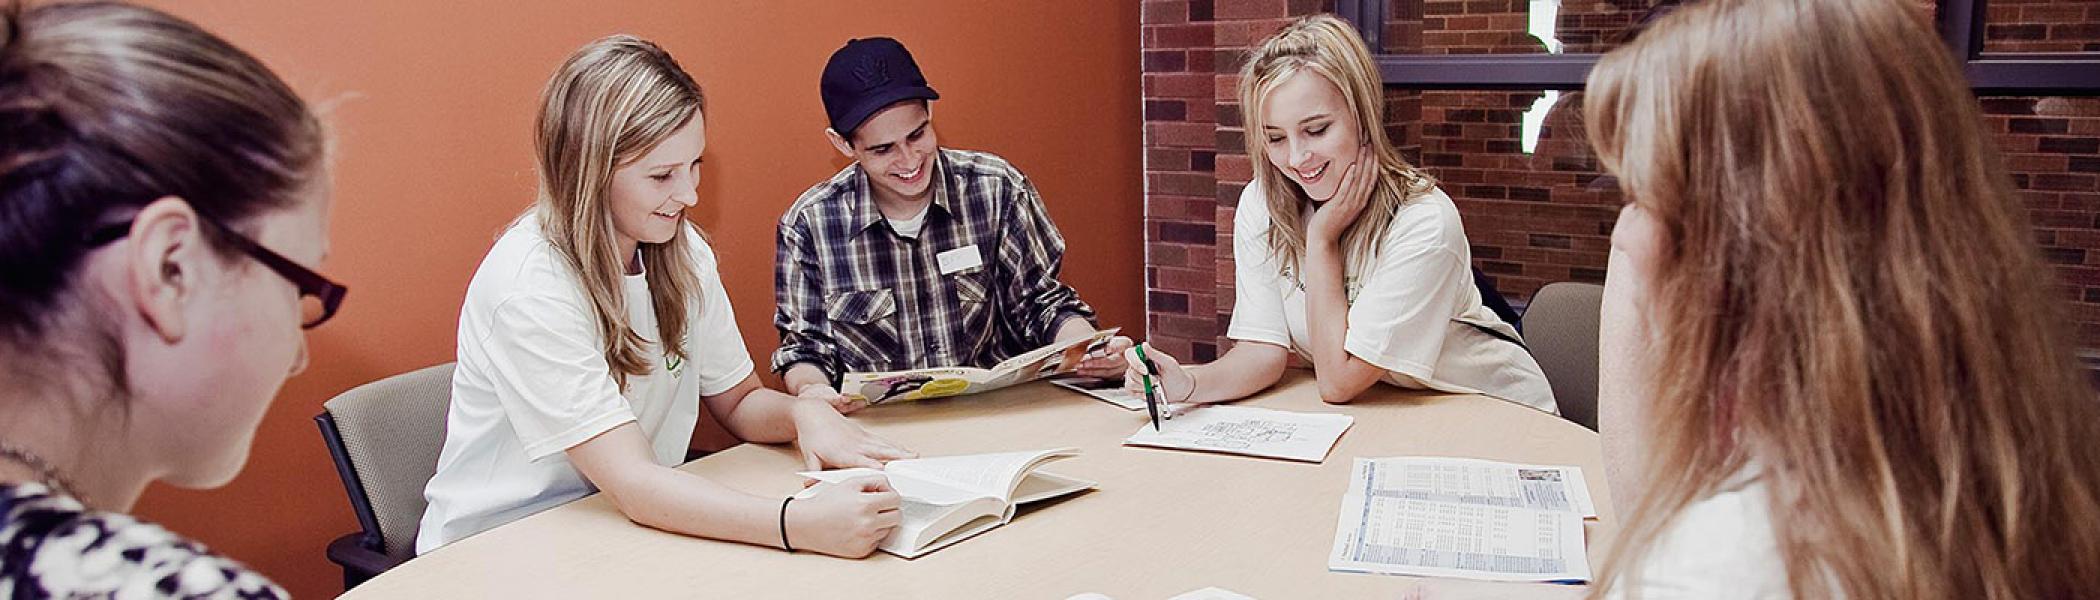 Trent University Durham students studying together in Durham campus.